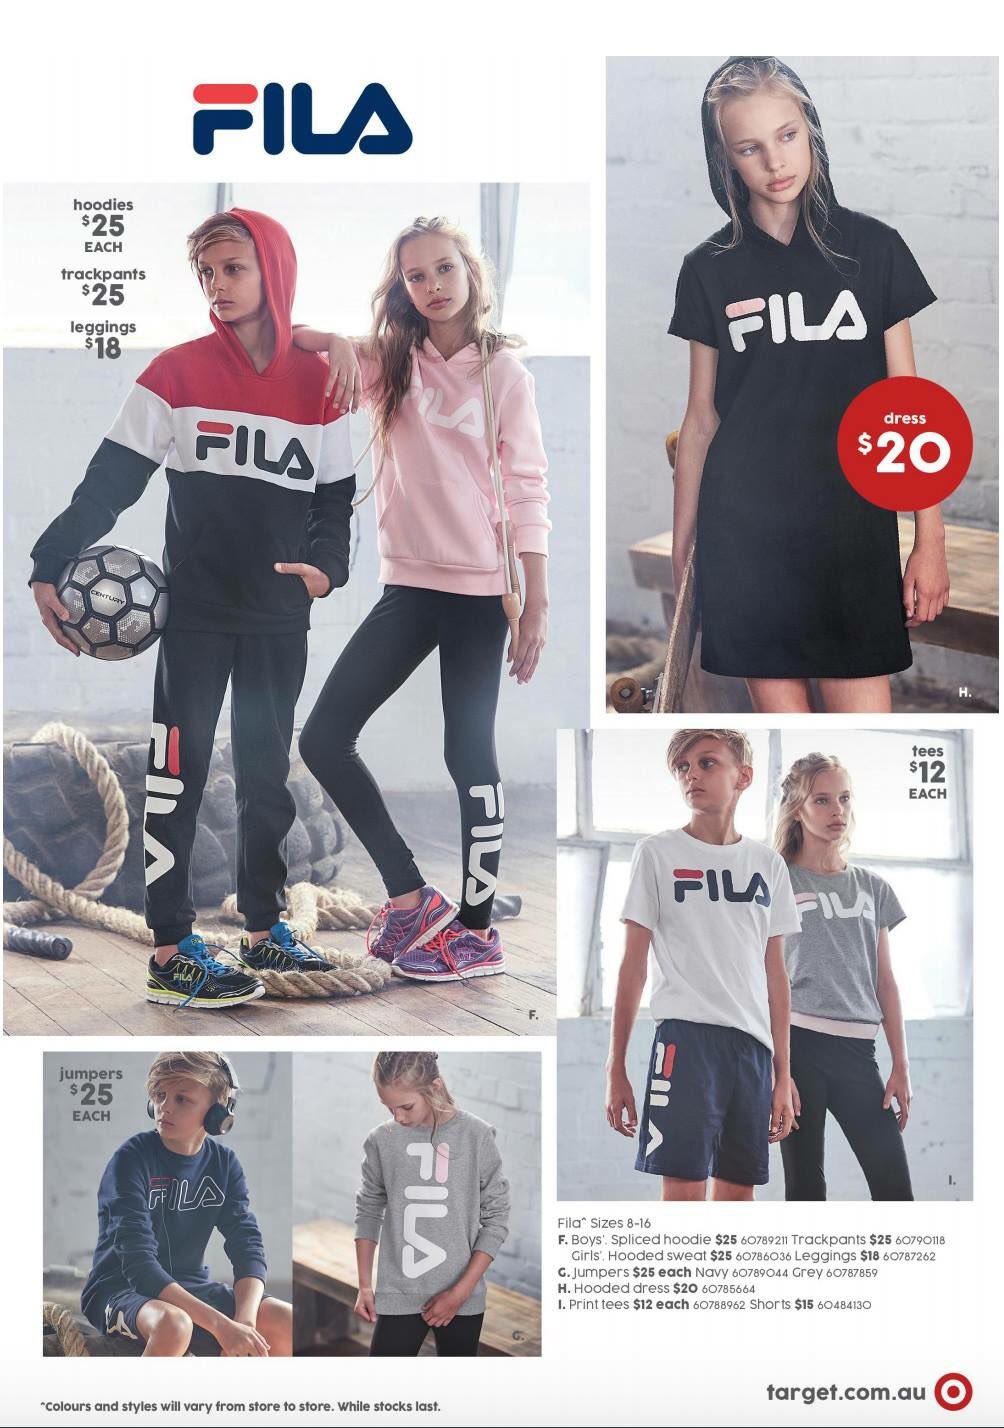 Cooper Chester on X: "Check out the current @Target catalogue! It was a lot  of fun #childmodel #catalogue #FILA #sportswear #aussiemodel #Photoshoot  #boyswear https://t.co/EGtbz4Hn71" / X